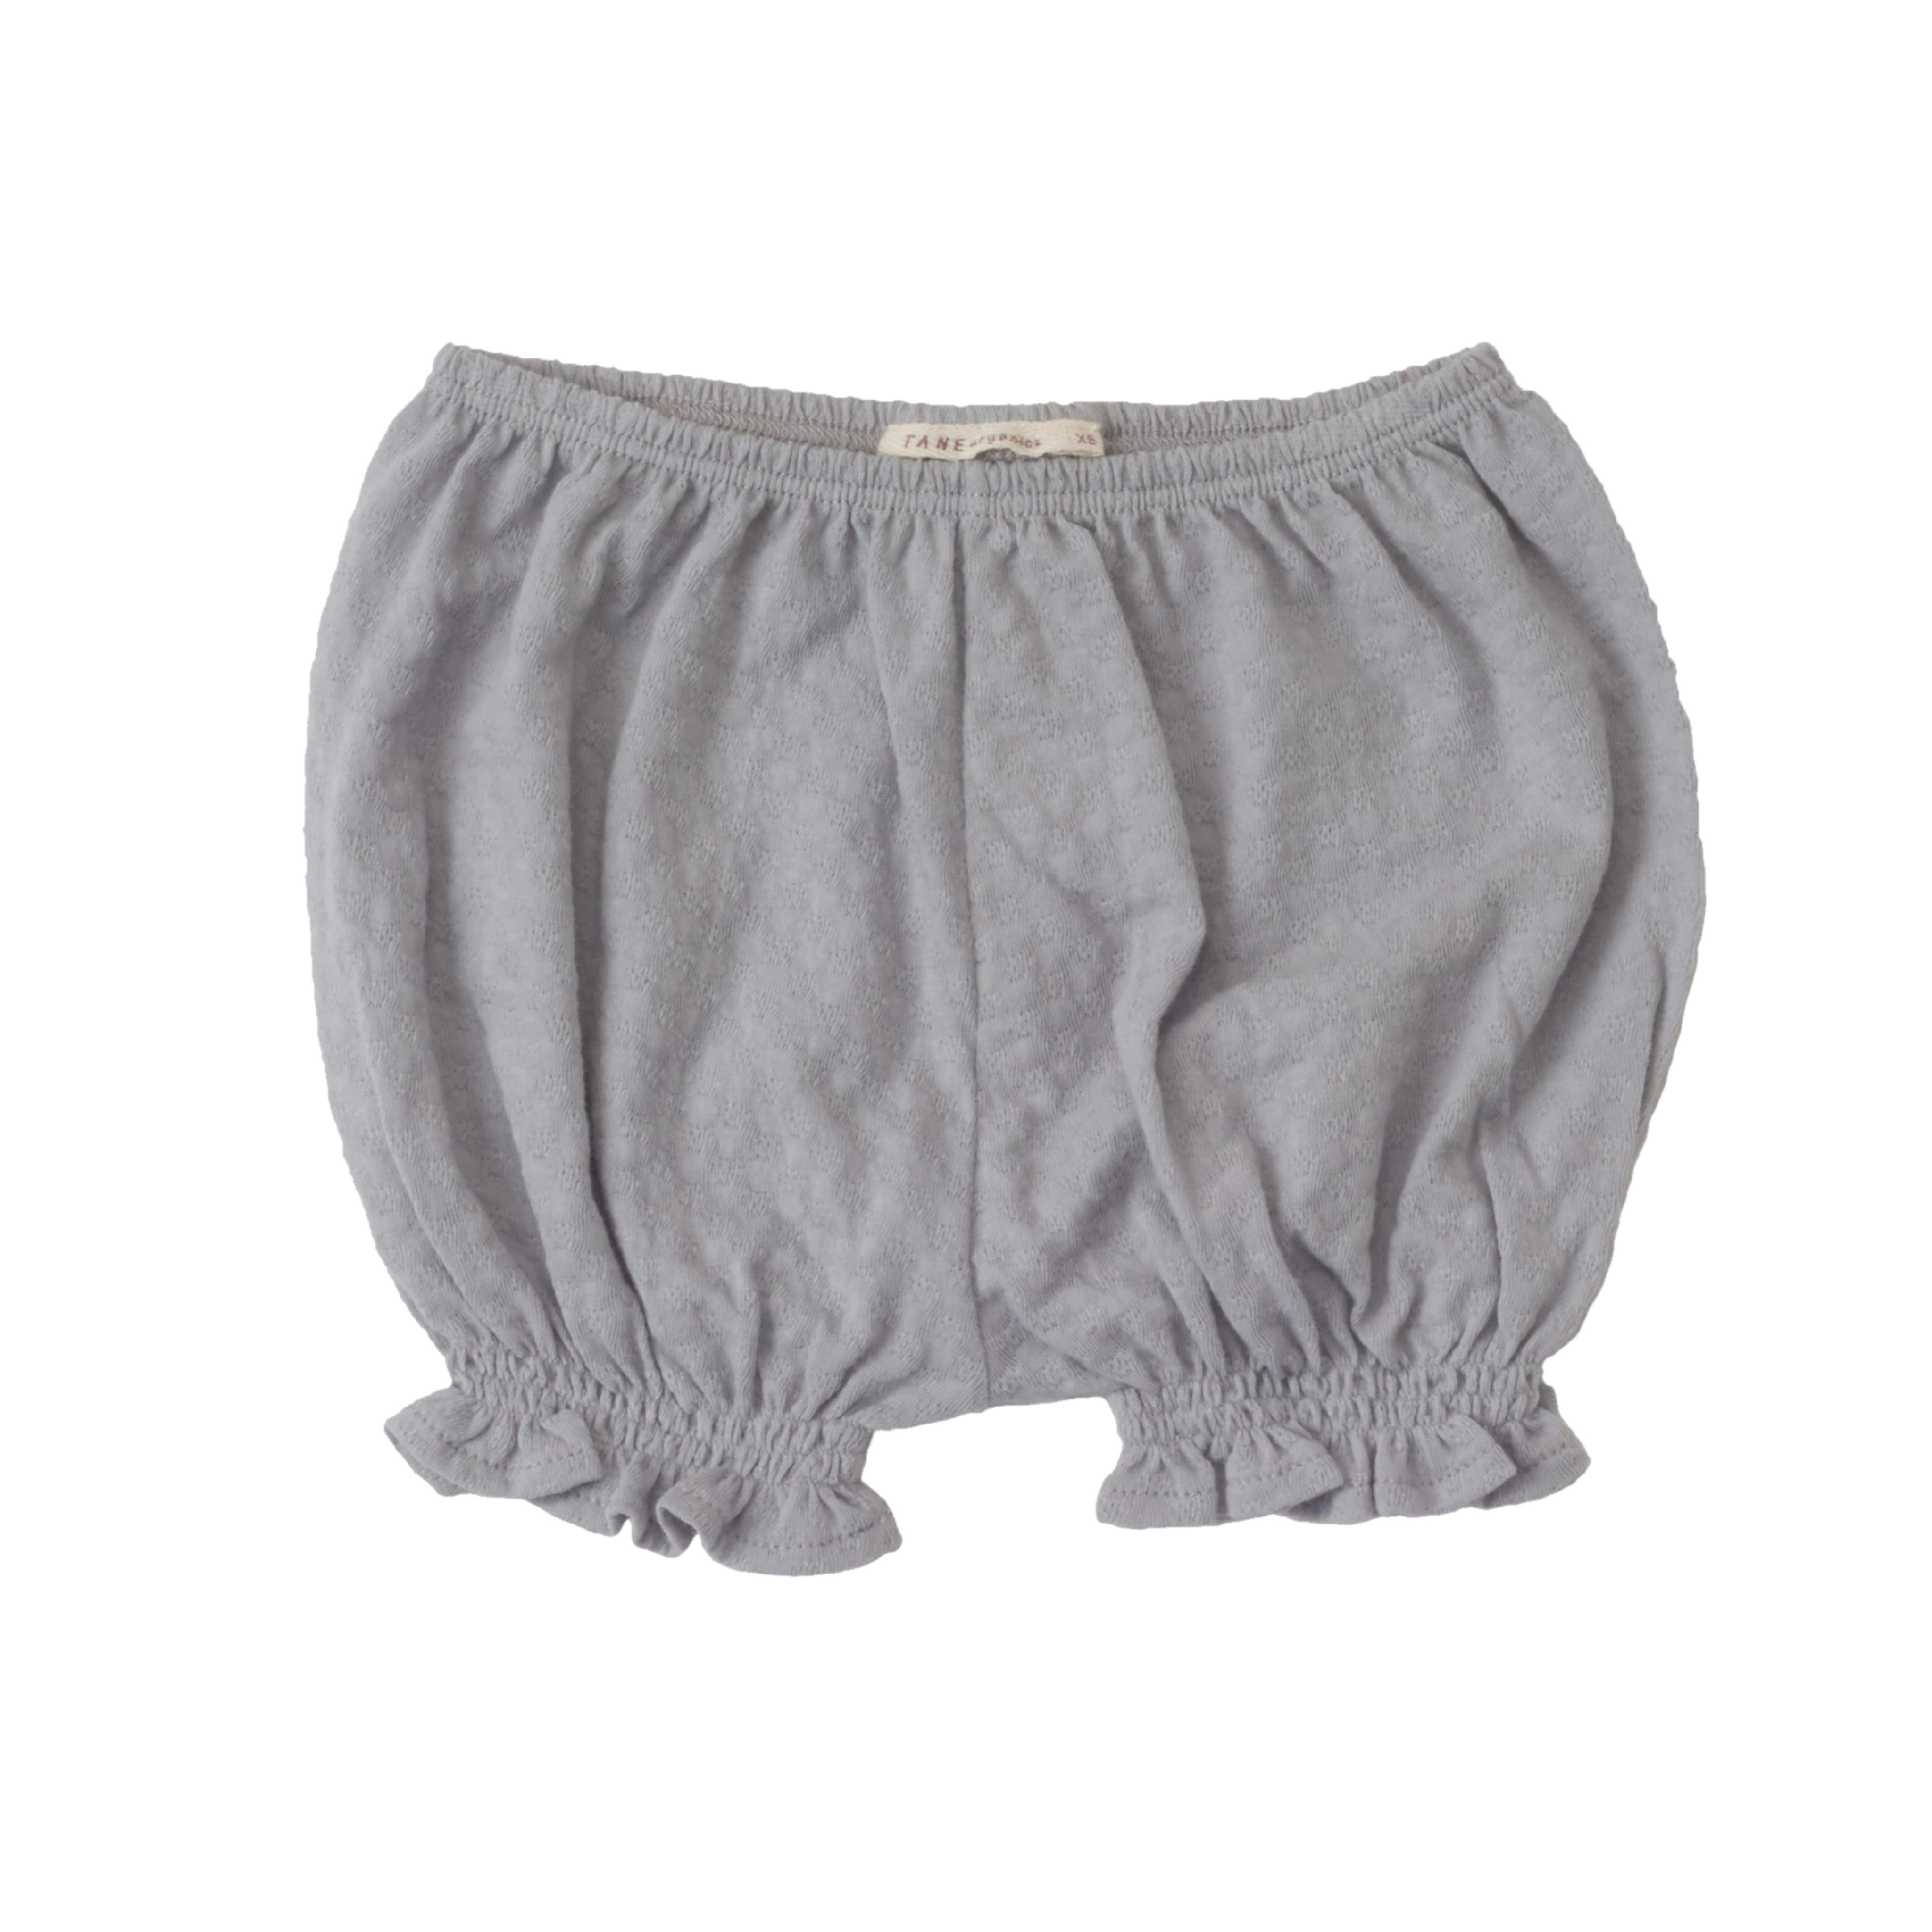 Pointelle Bloomers